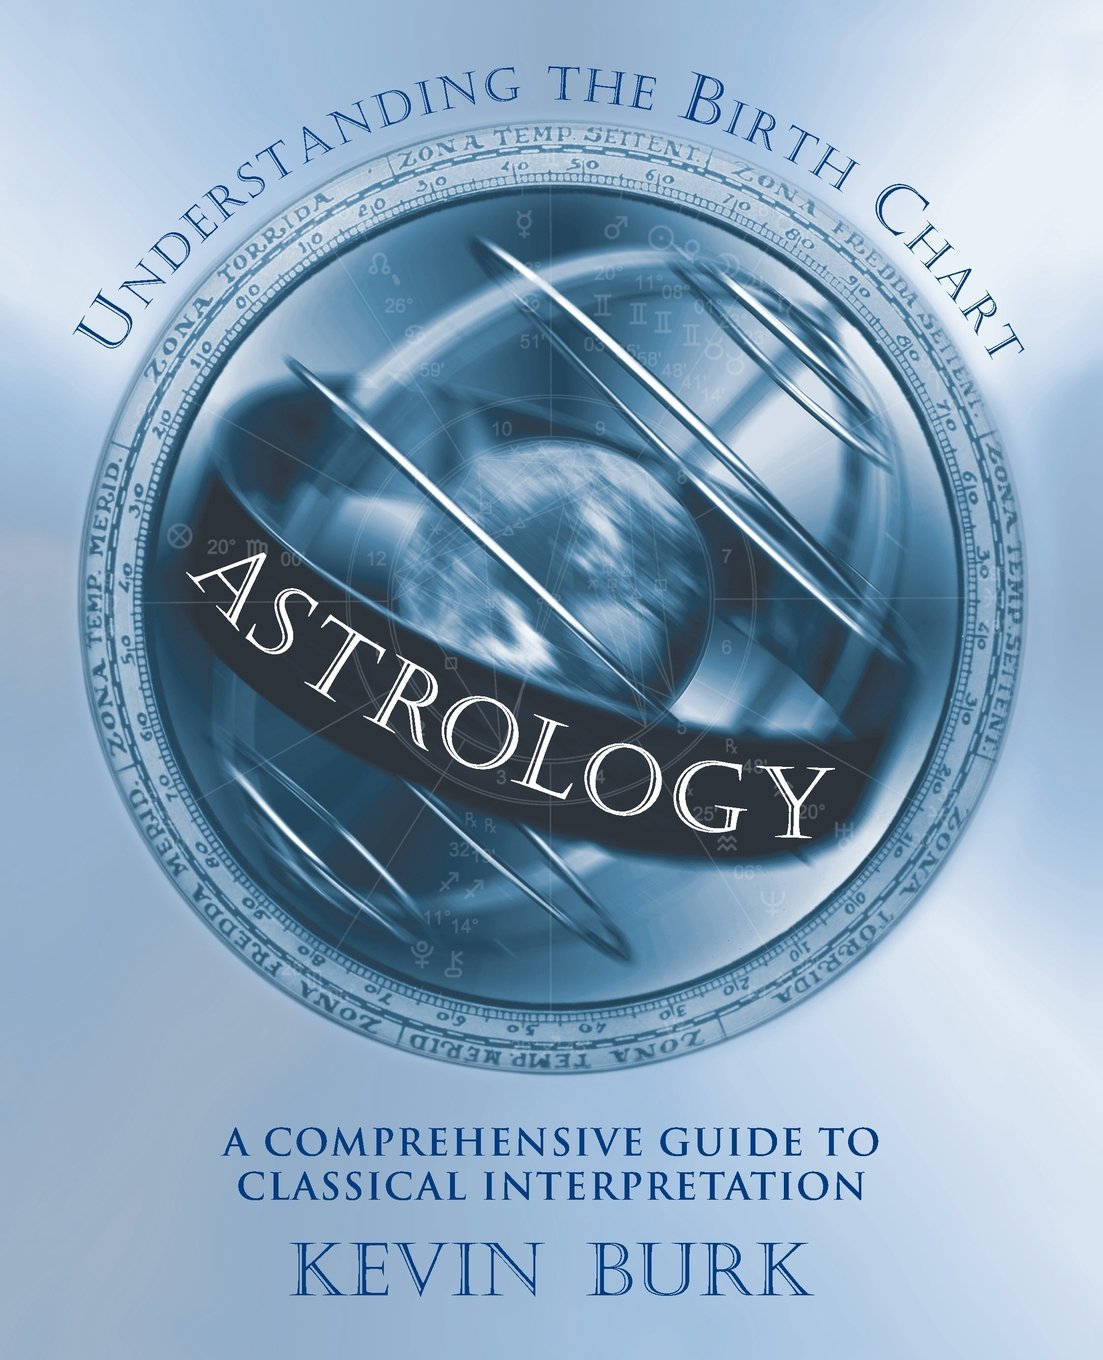 Astrology Understanding the Birth Chart By:	Kevin Burk